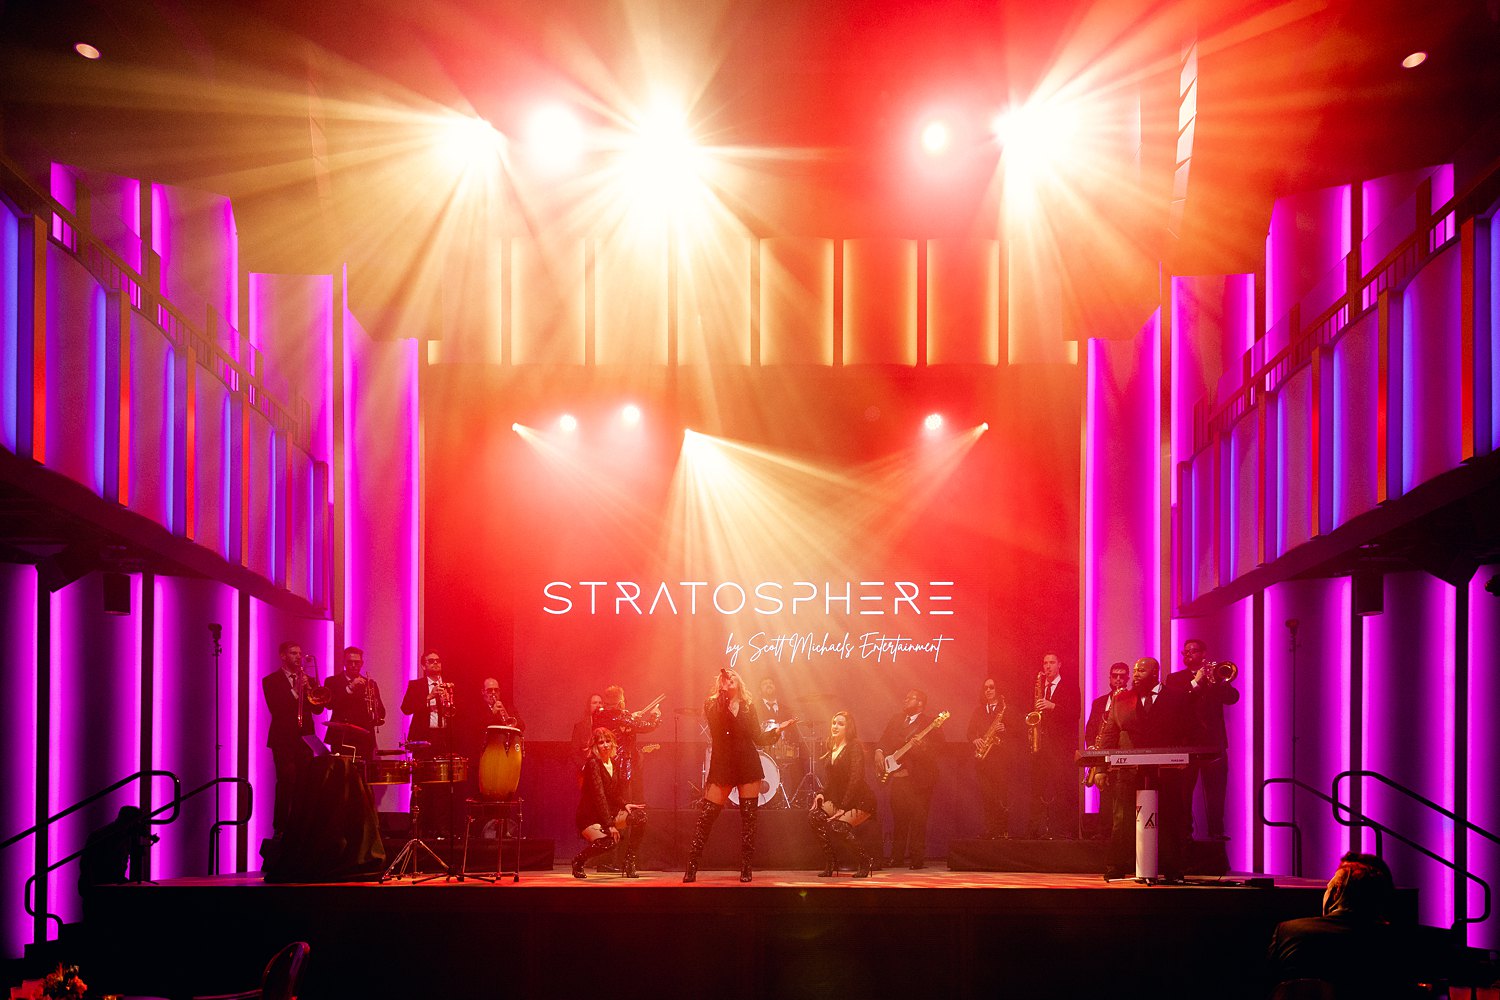 Singers in stratosphere wedding band standing on stage in bright red lights